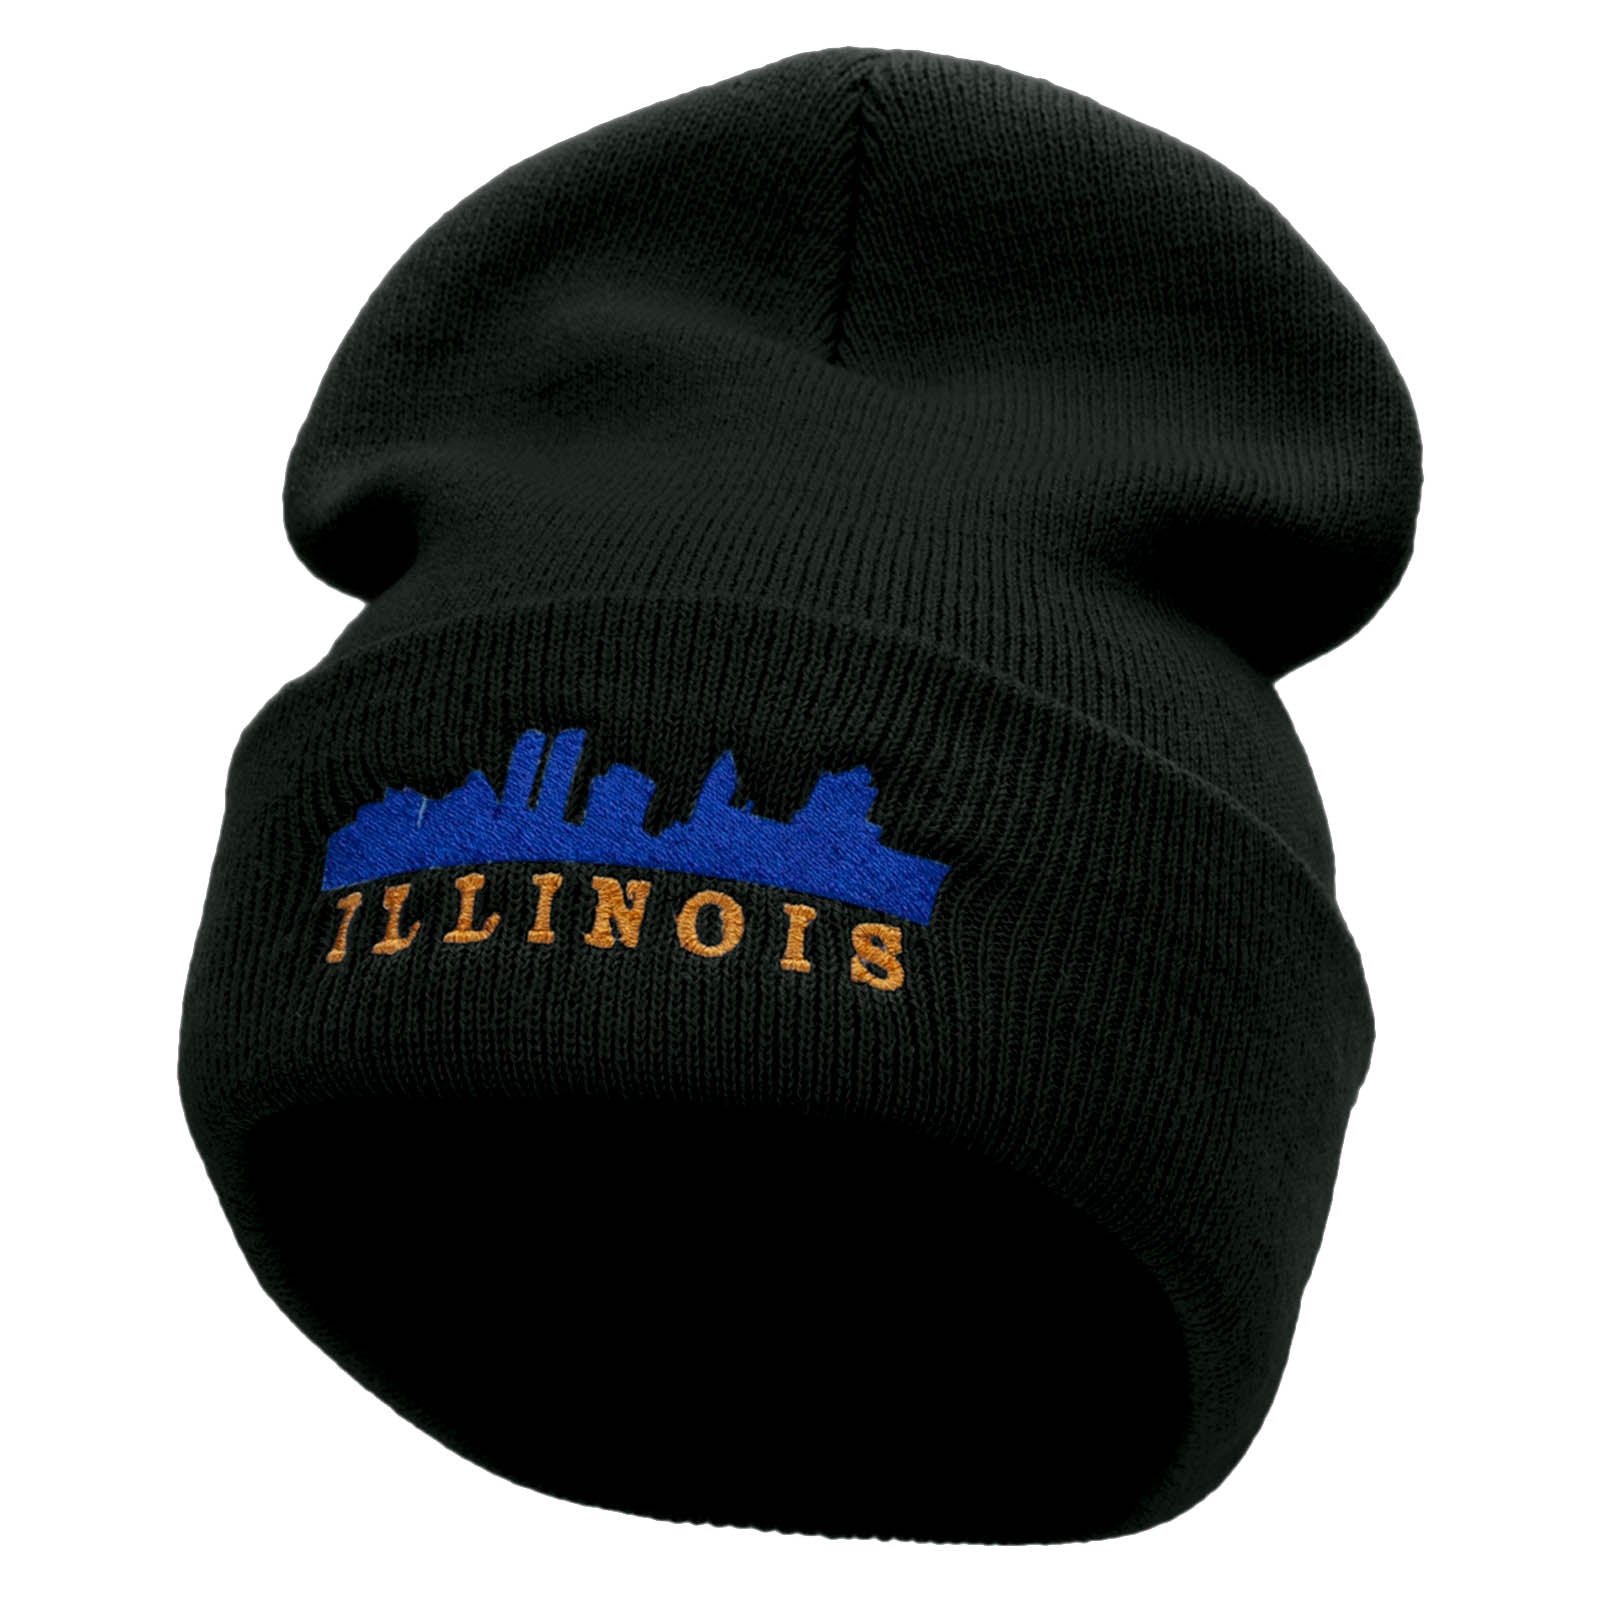 Illinois Skyline Embroidered 12 Inch Long Knitted Beanie - Black OSFM